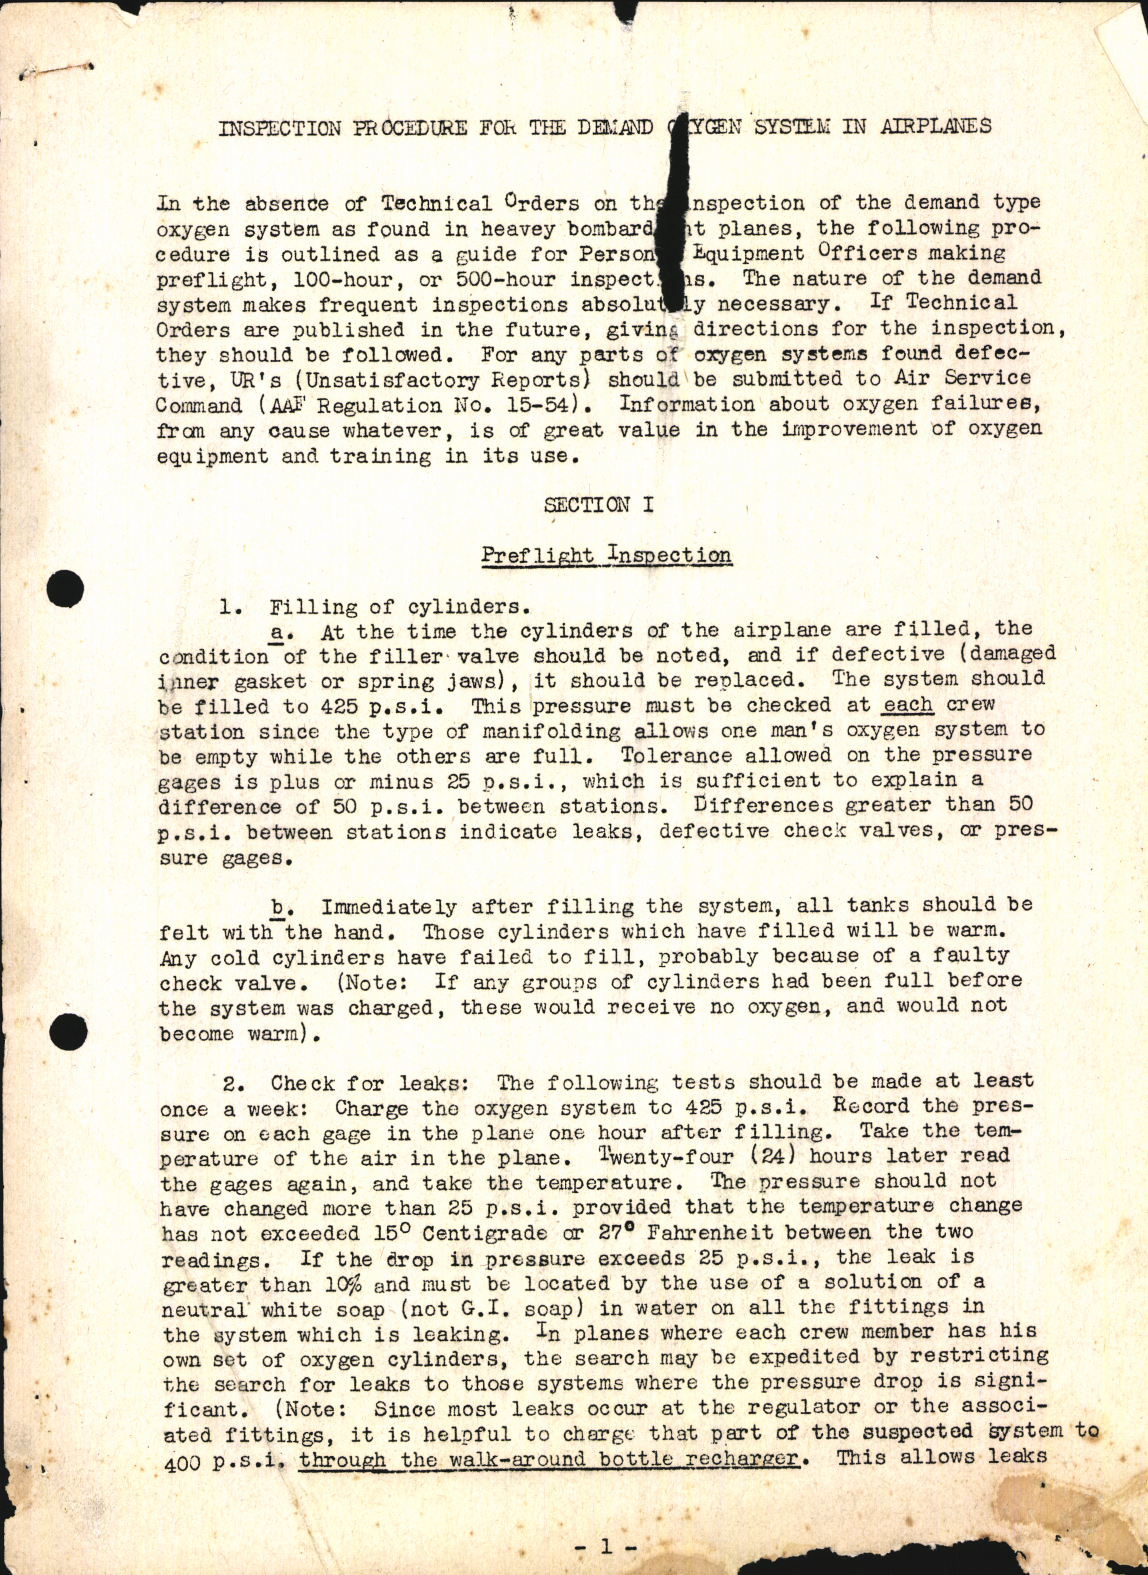 Sample page 1 from AirCorps Library document: Inspection Procedure for Demand Oxygen System in Airplanes